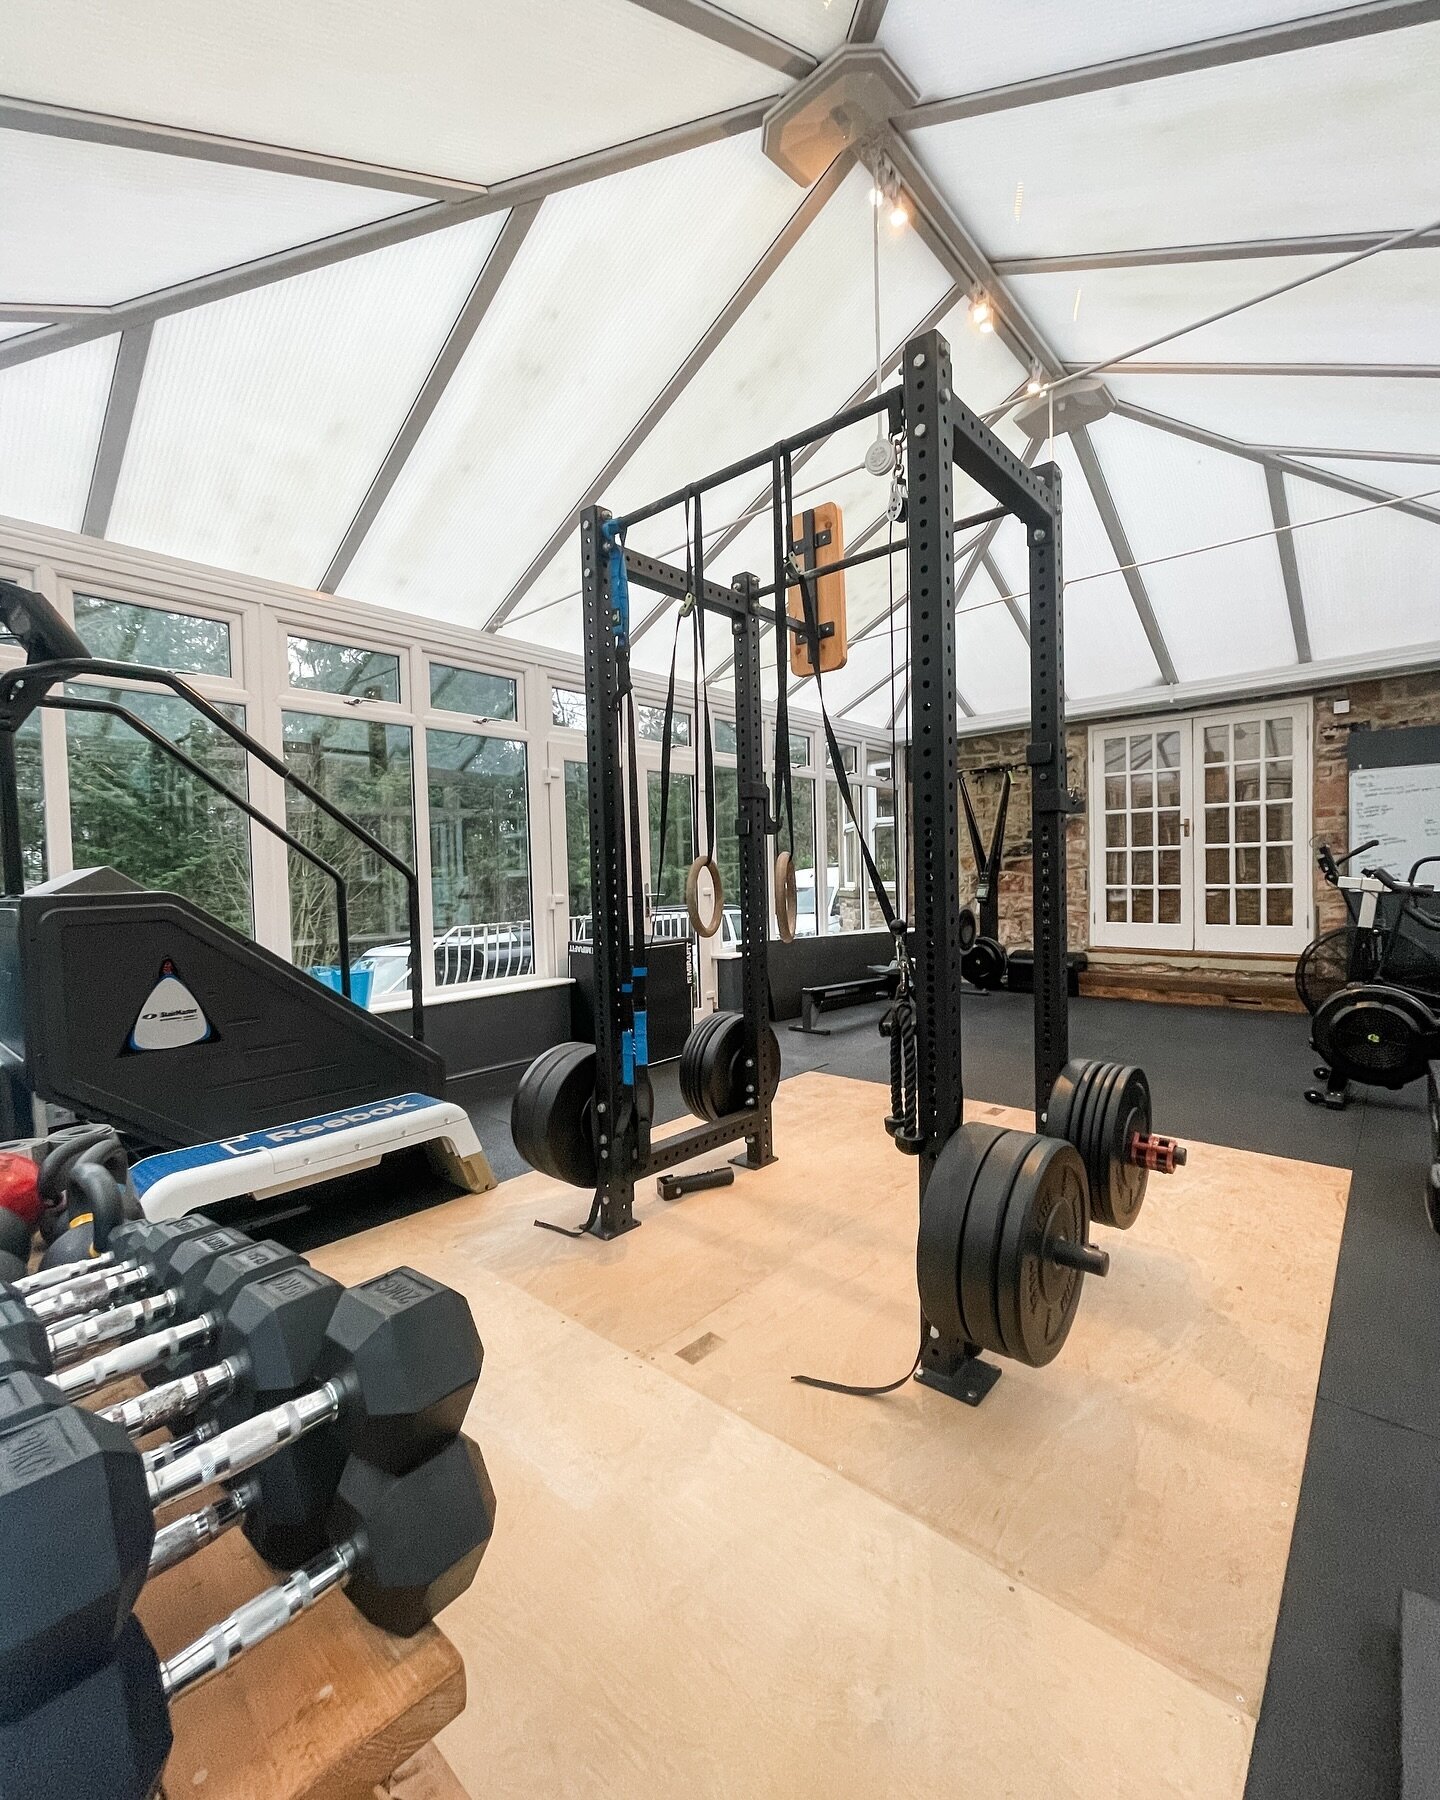 Our private personal training gym. 

For those apprehensive about stepping into a crowded commercial gym, unsure about which exercises to do or how to perform them safely. 

For those looking for support in their training journey, a good laugh and to